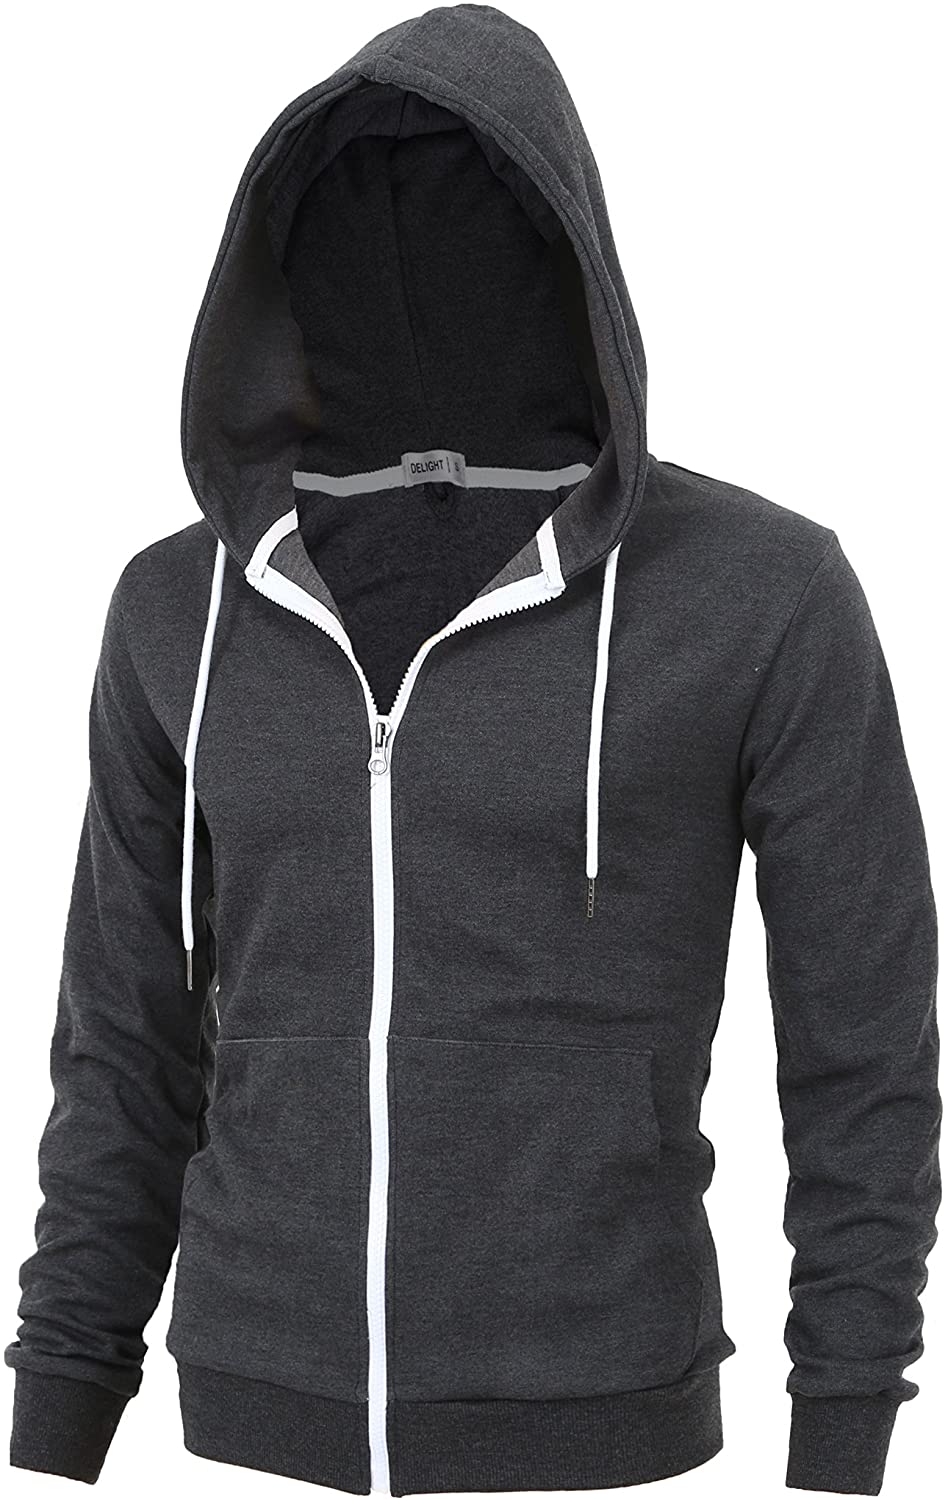 "DELIGHT" Men's Fashion Fit Full-zip HOODIE with Inner Cell 